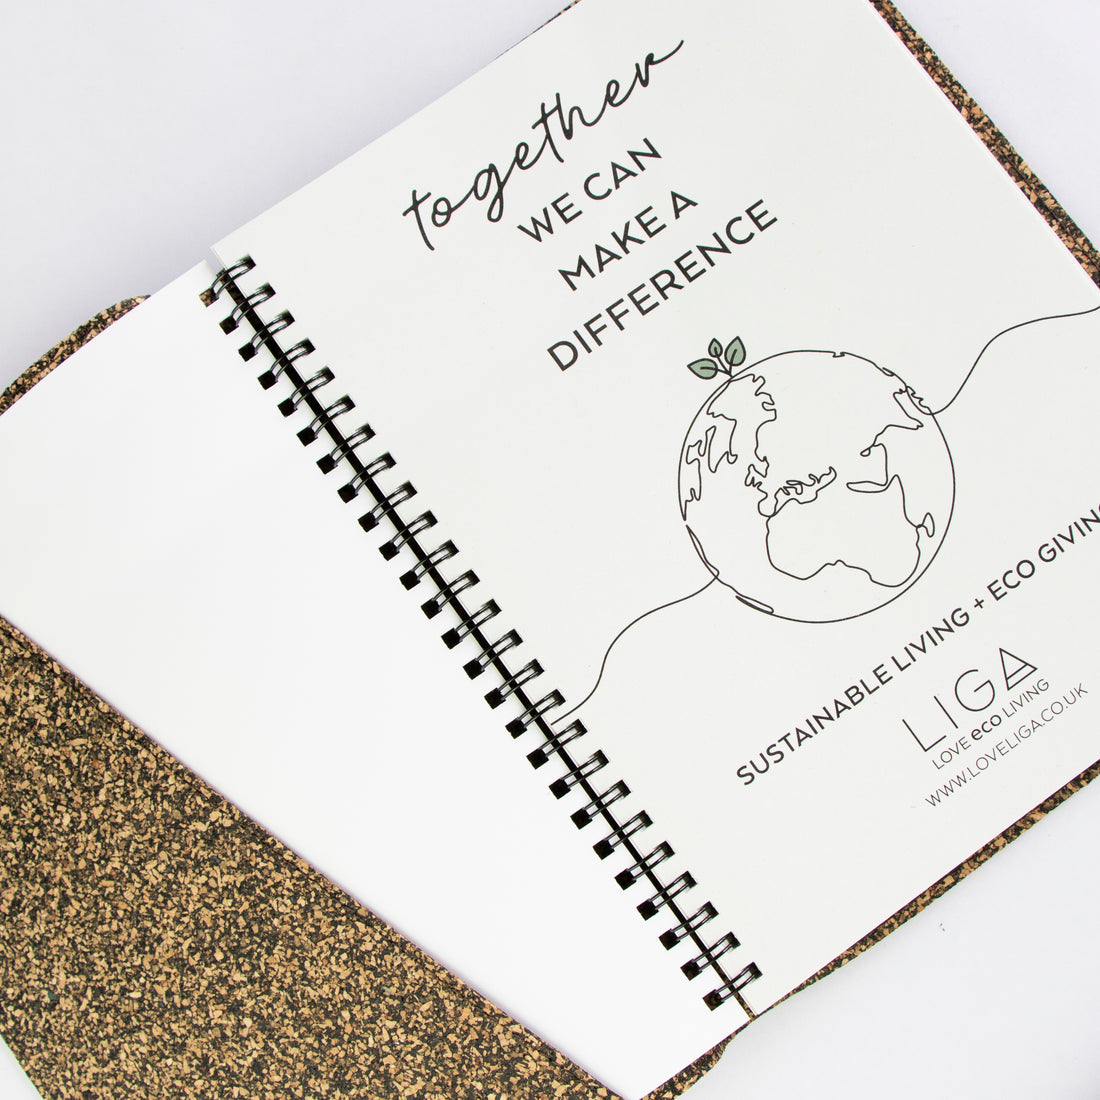 Sustainable Dash a5 notebook and refill